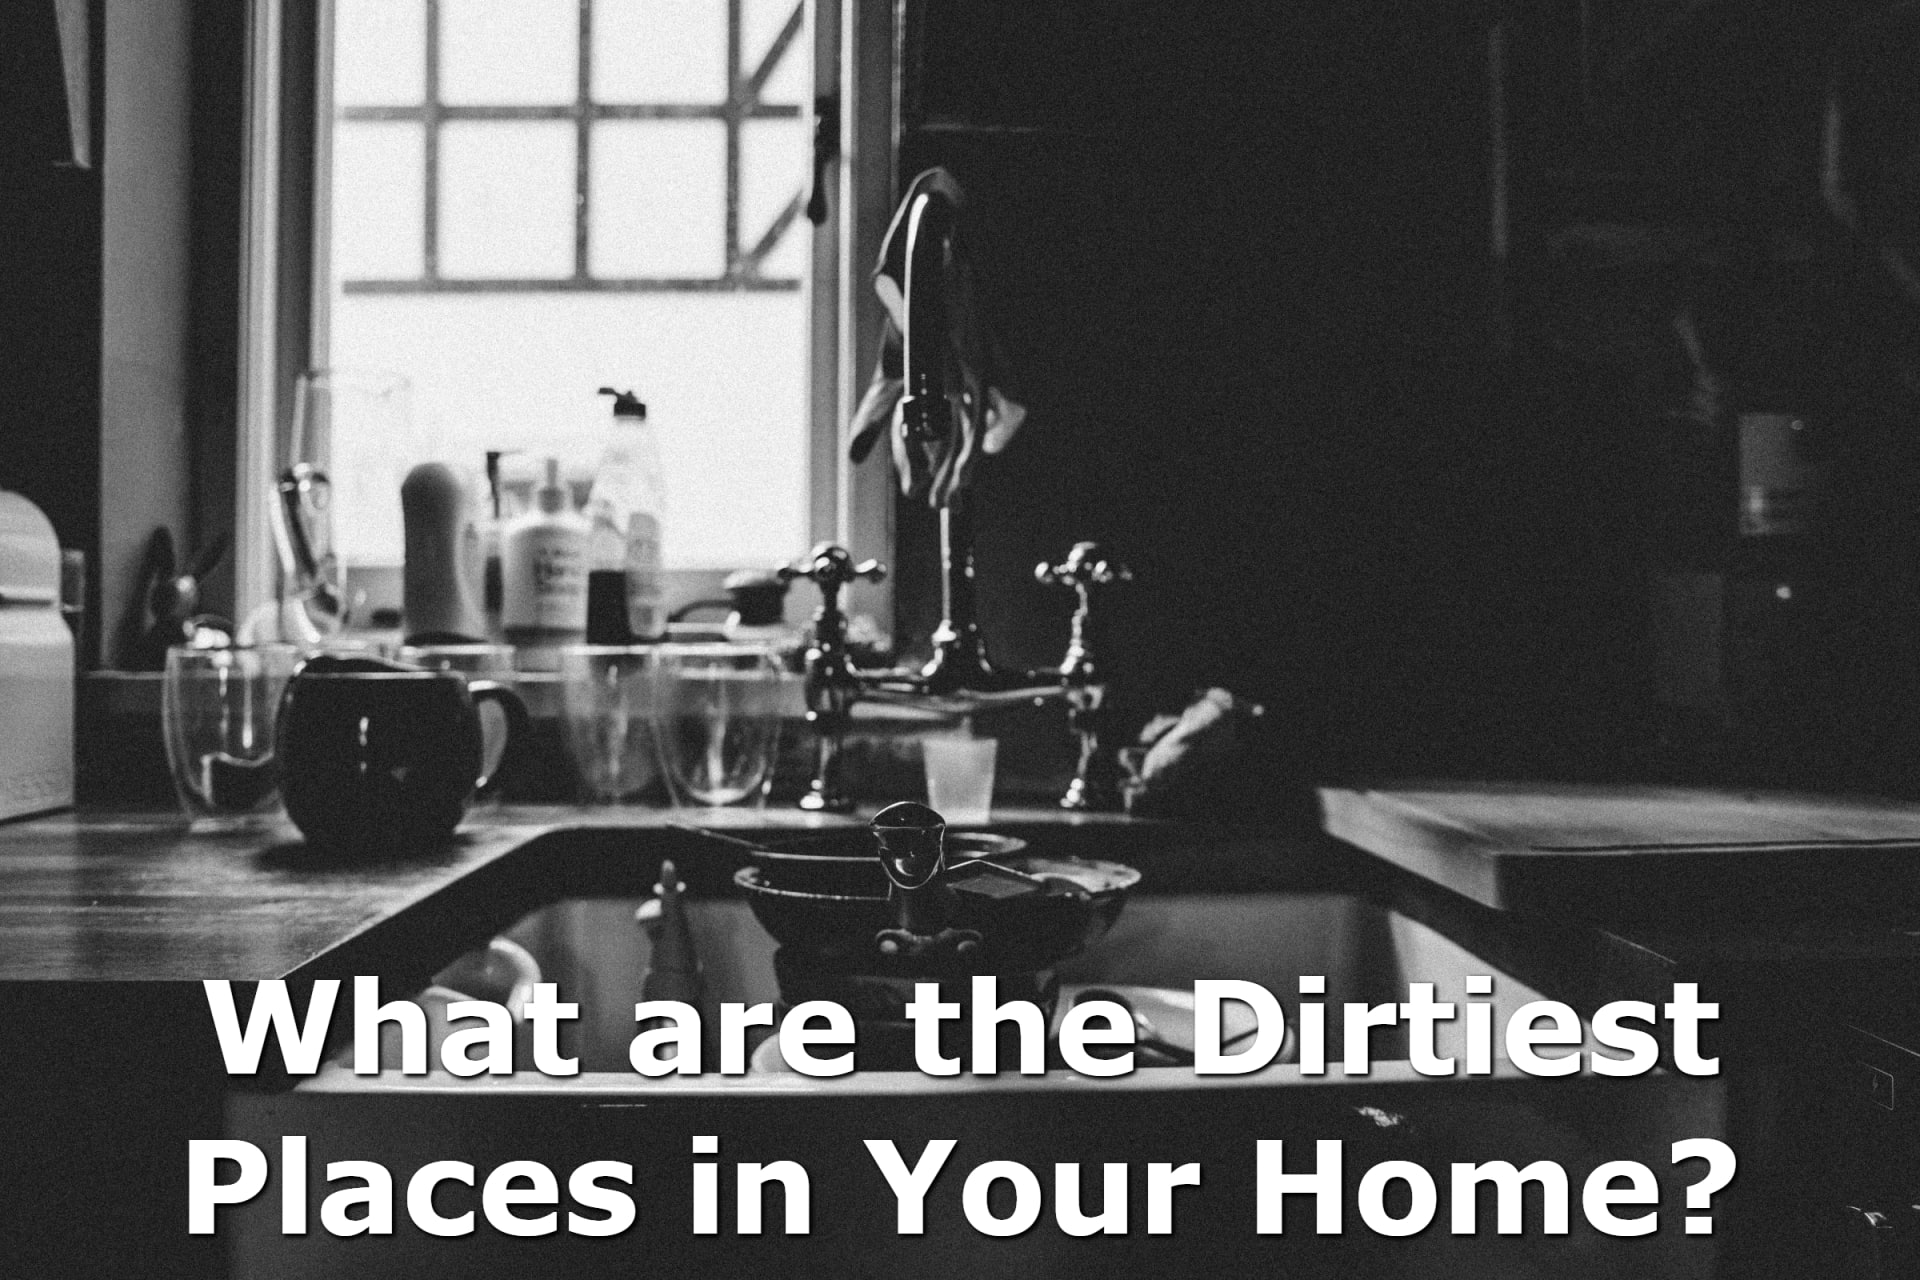 What Are the Dirtiest Places in Your Home?